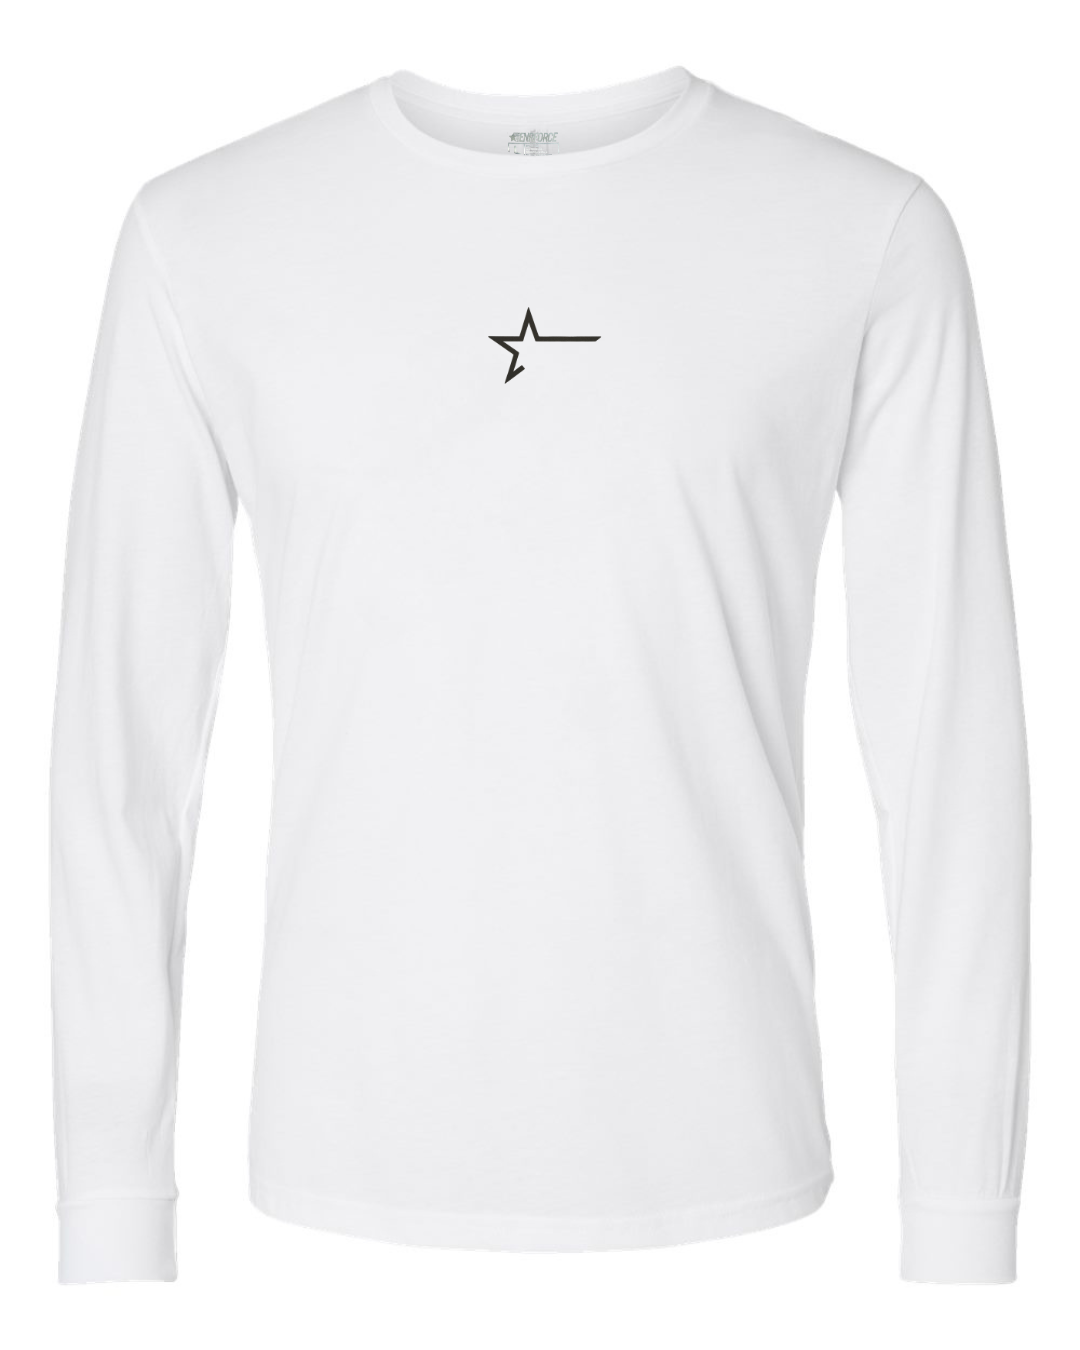 Limited Edition White Long Sleeve